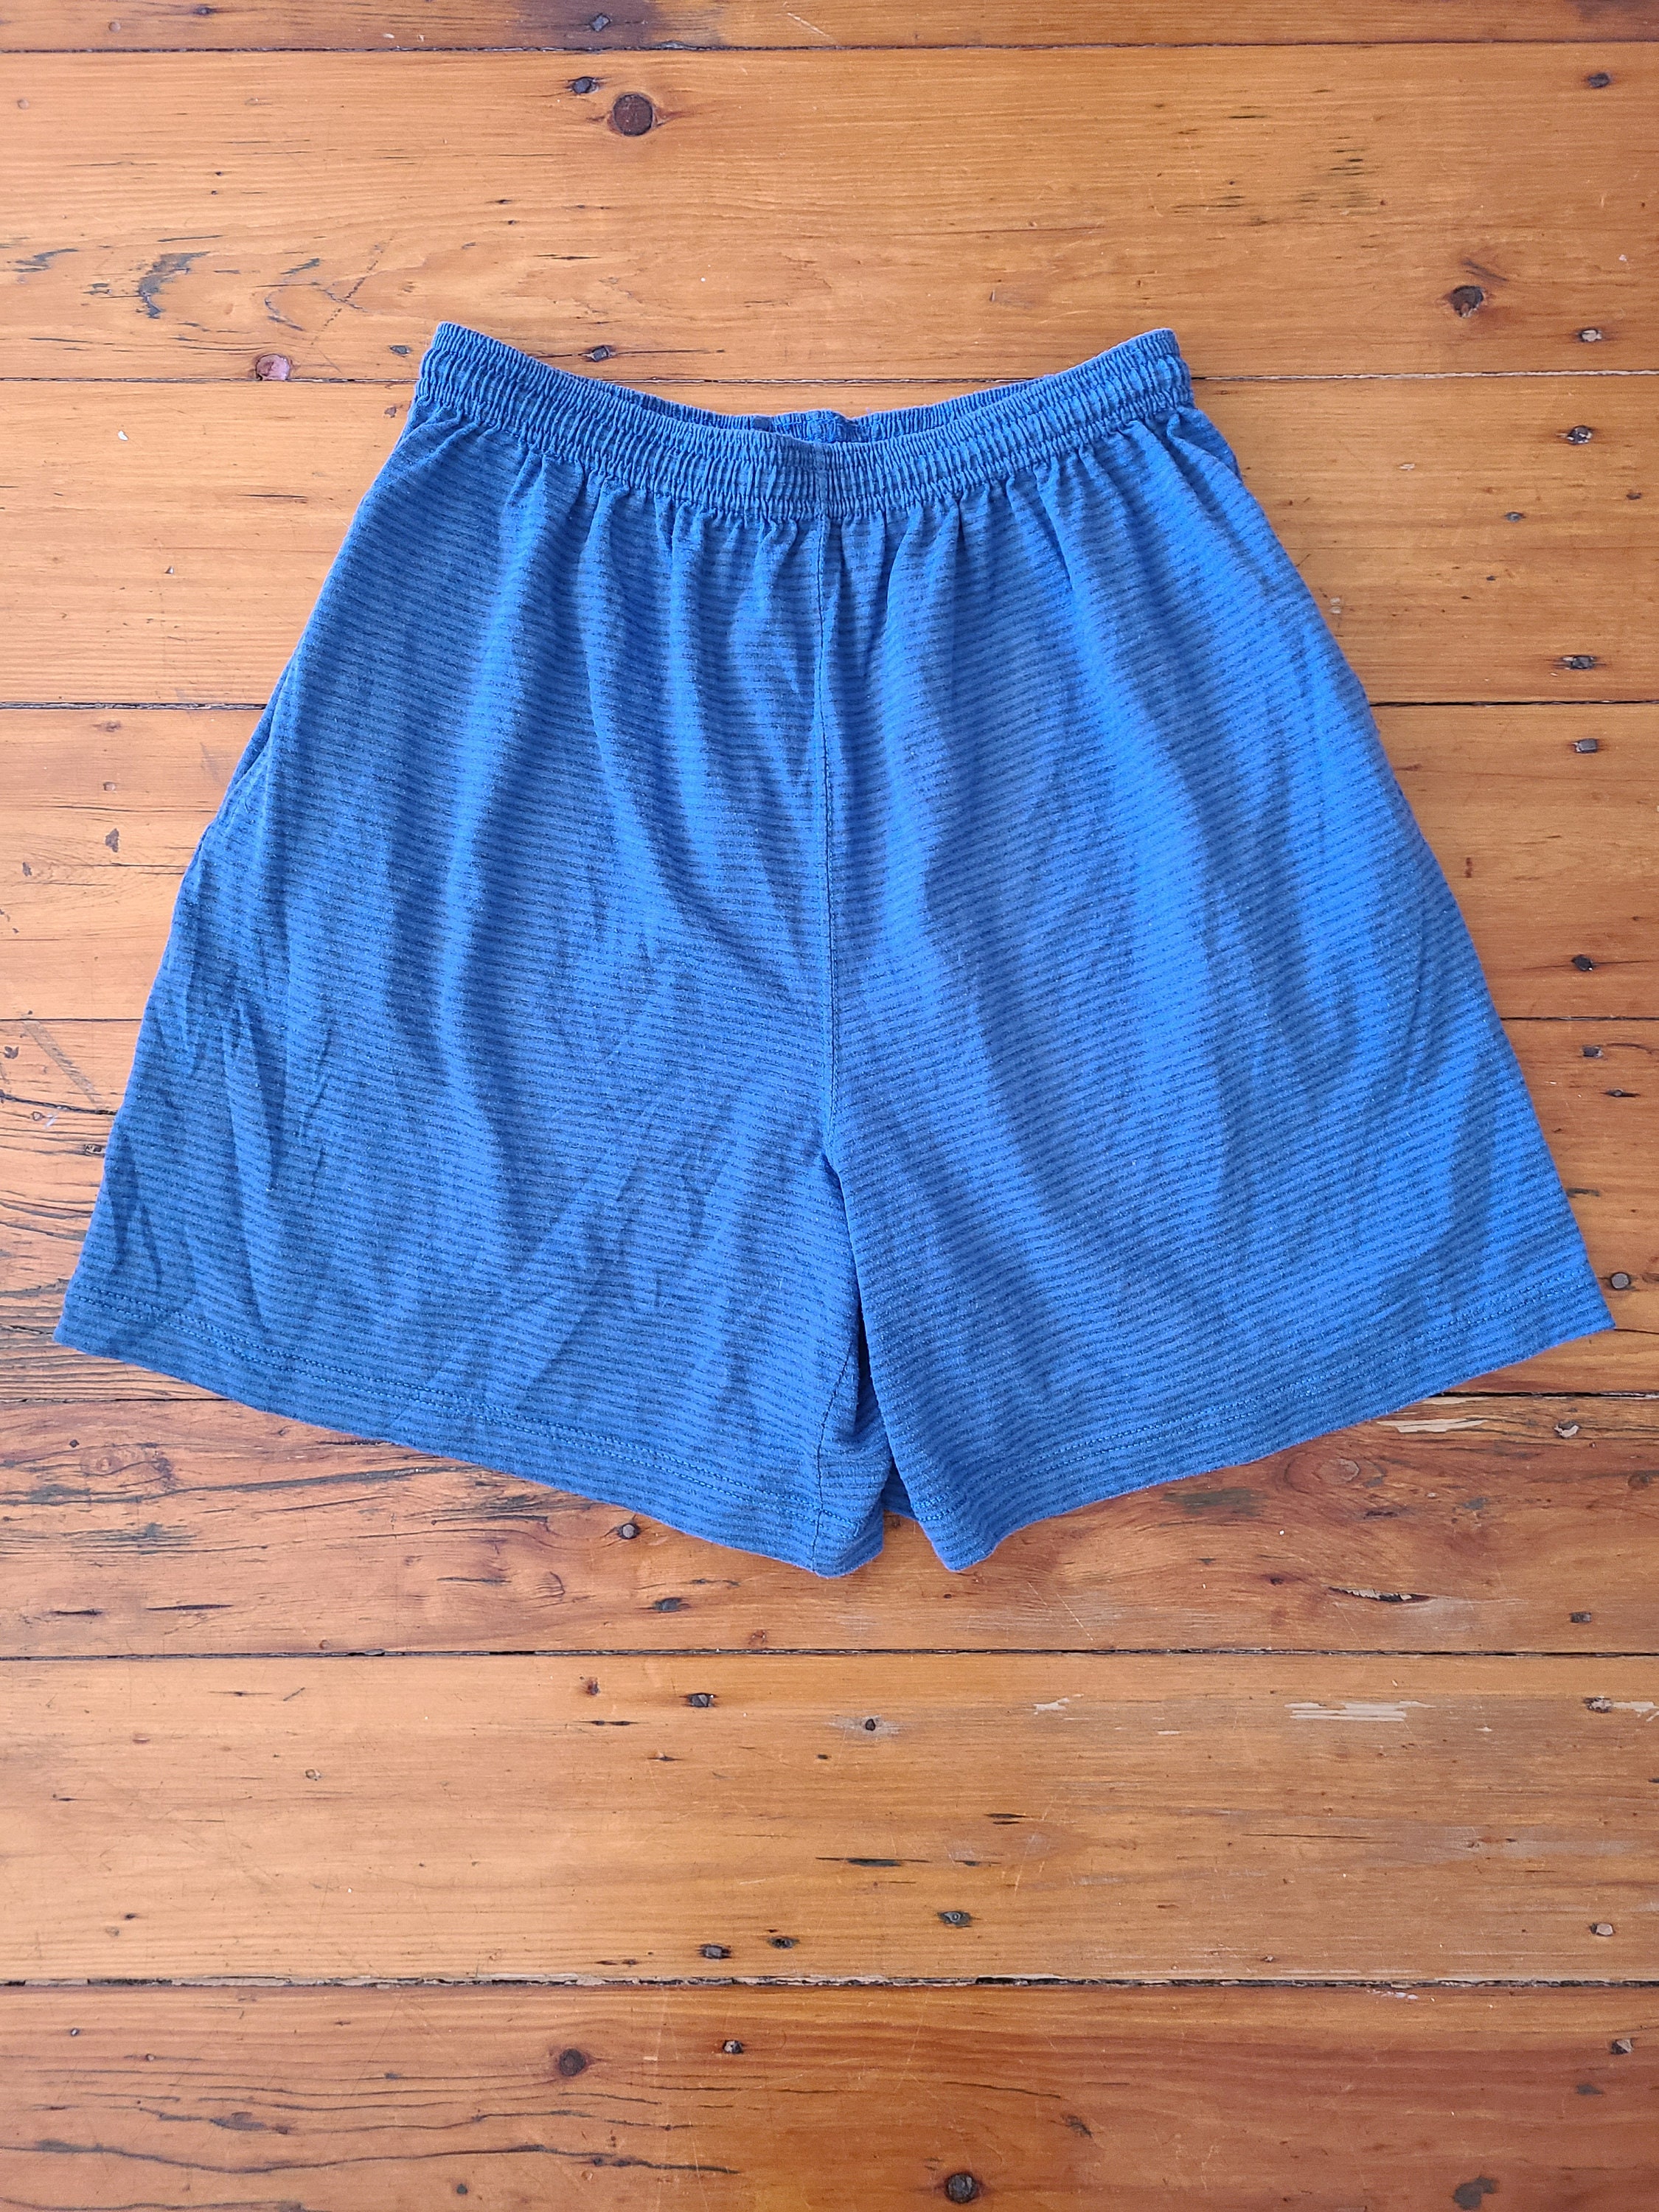 Vintage Russell Athletic Sanitary Shorts Mens Size XL Deadstock NWOT 90s  Made in USA 